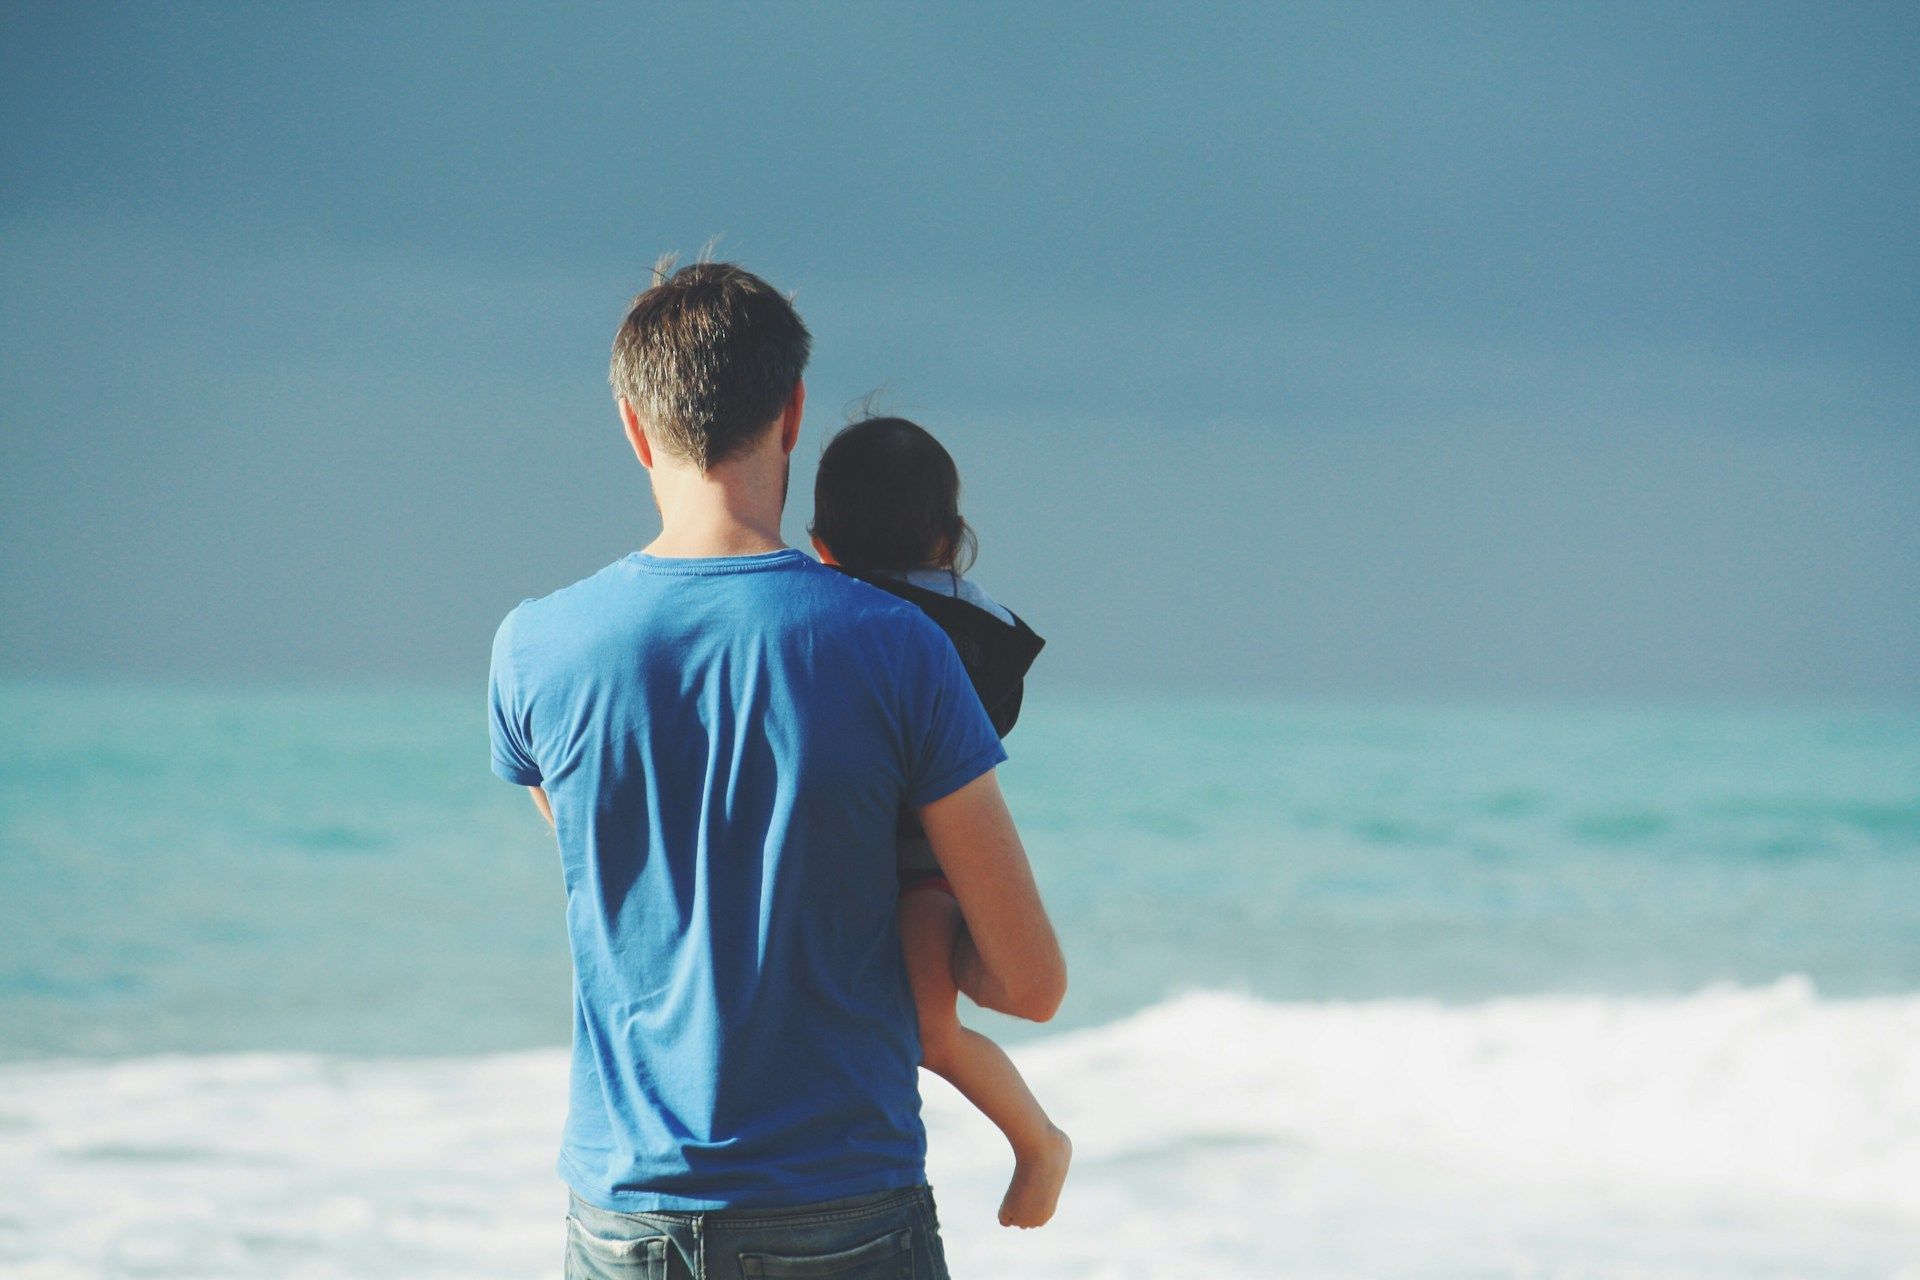 A man is holding a baby on the beach.